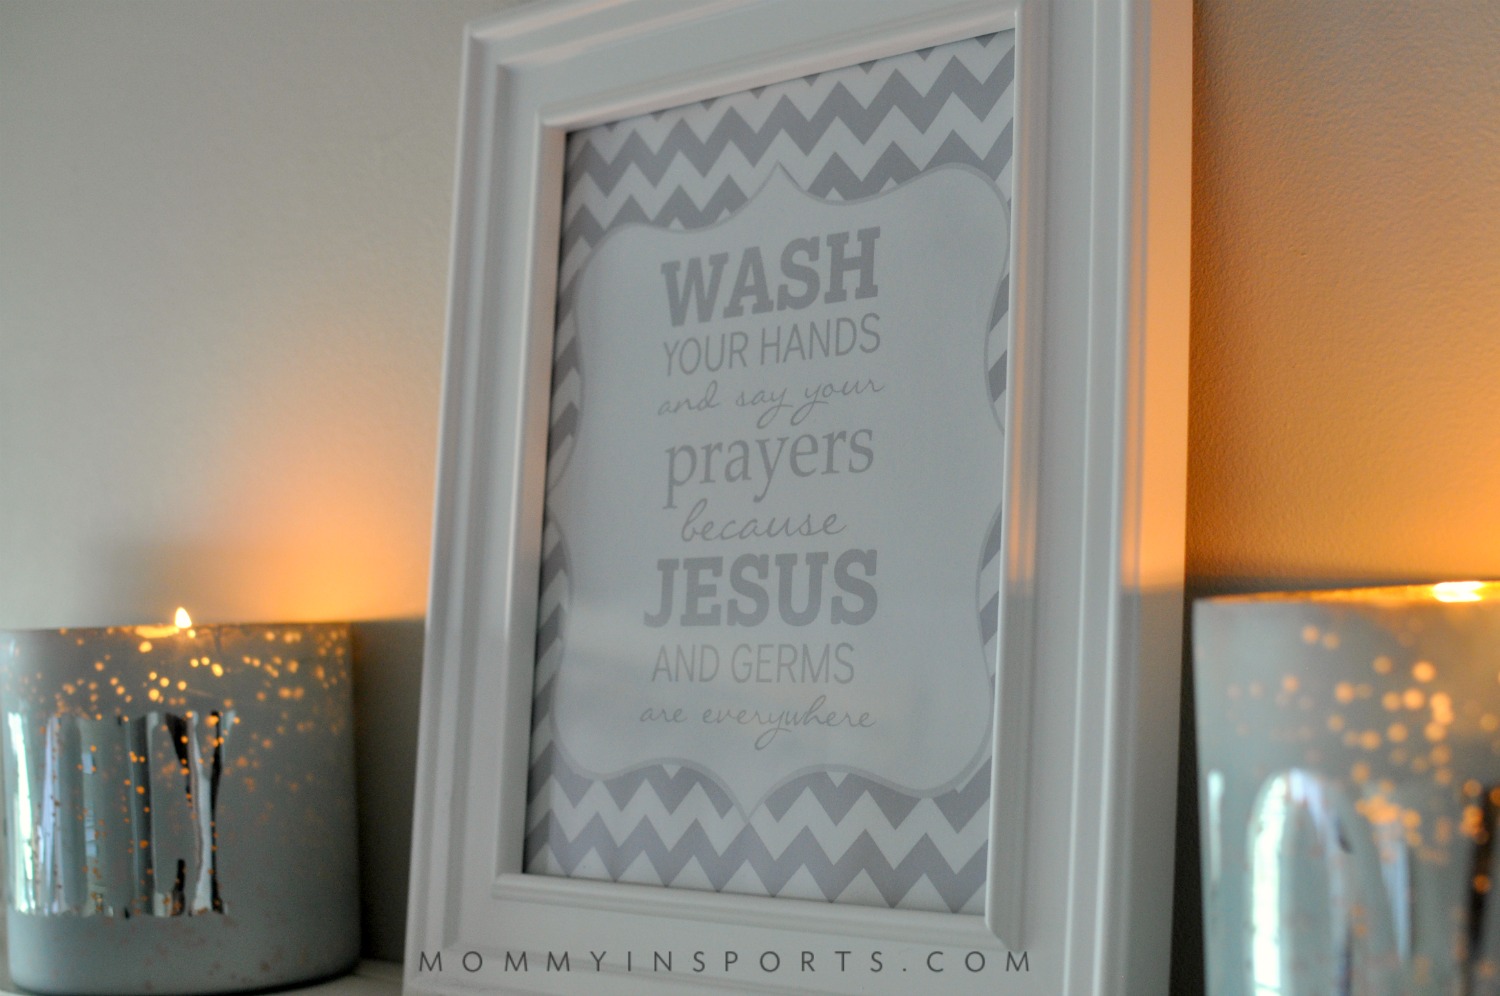 Looking for a cute printable to dress up your kids bathroom? They won't forget to wash their hands with this hanging near their sink! Print out this FREE bathroom printable now!